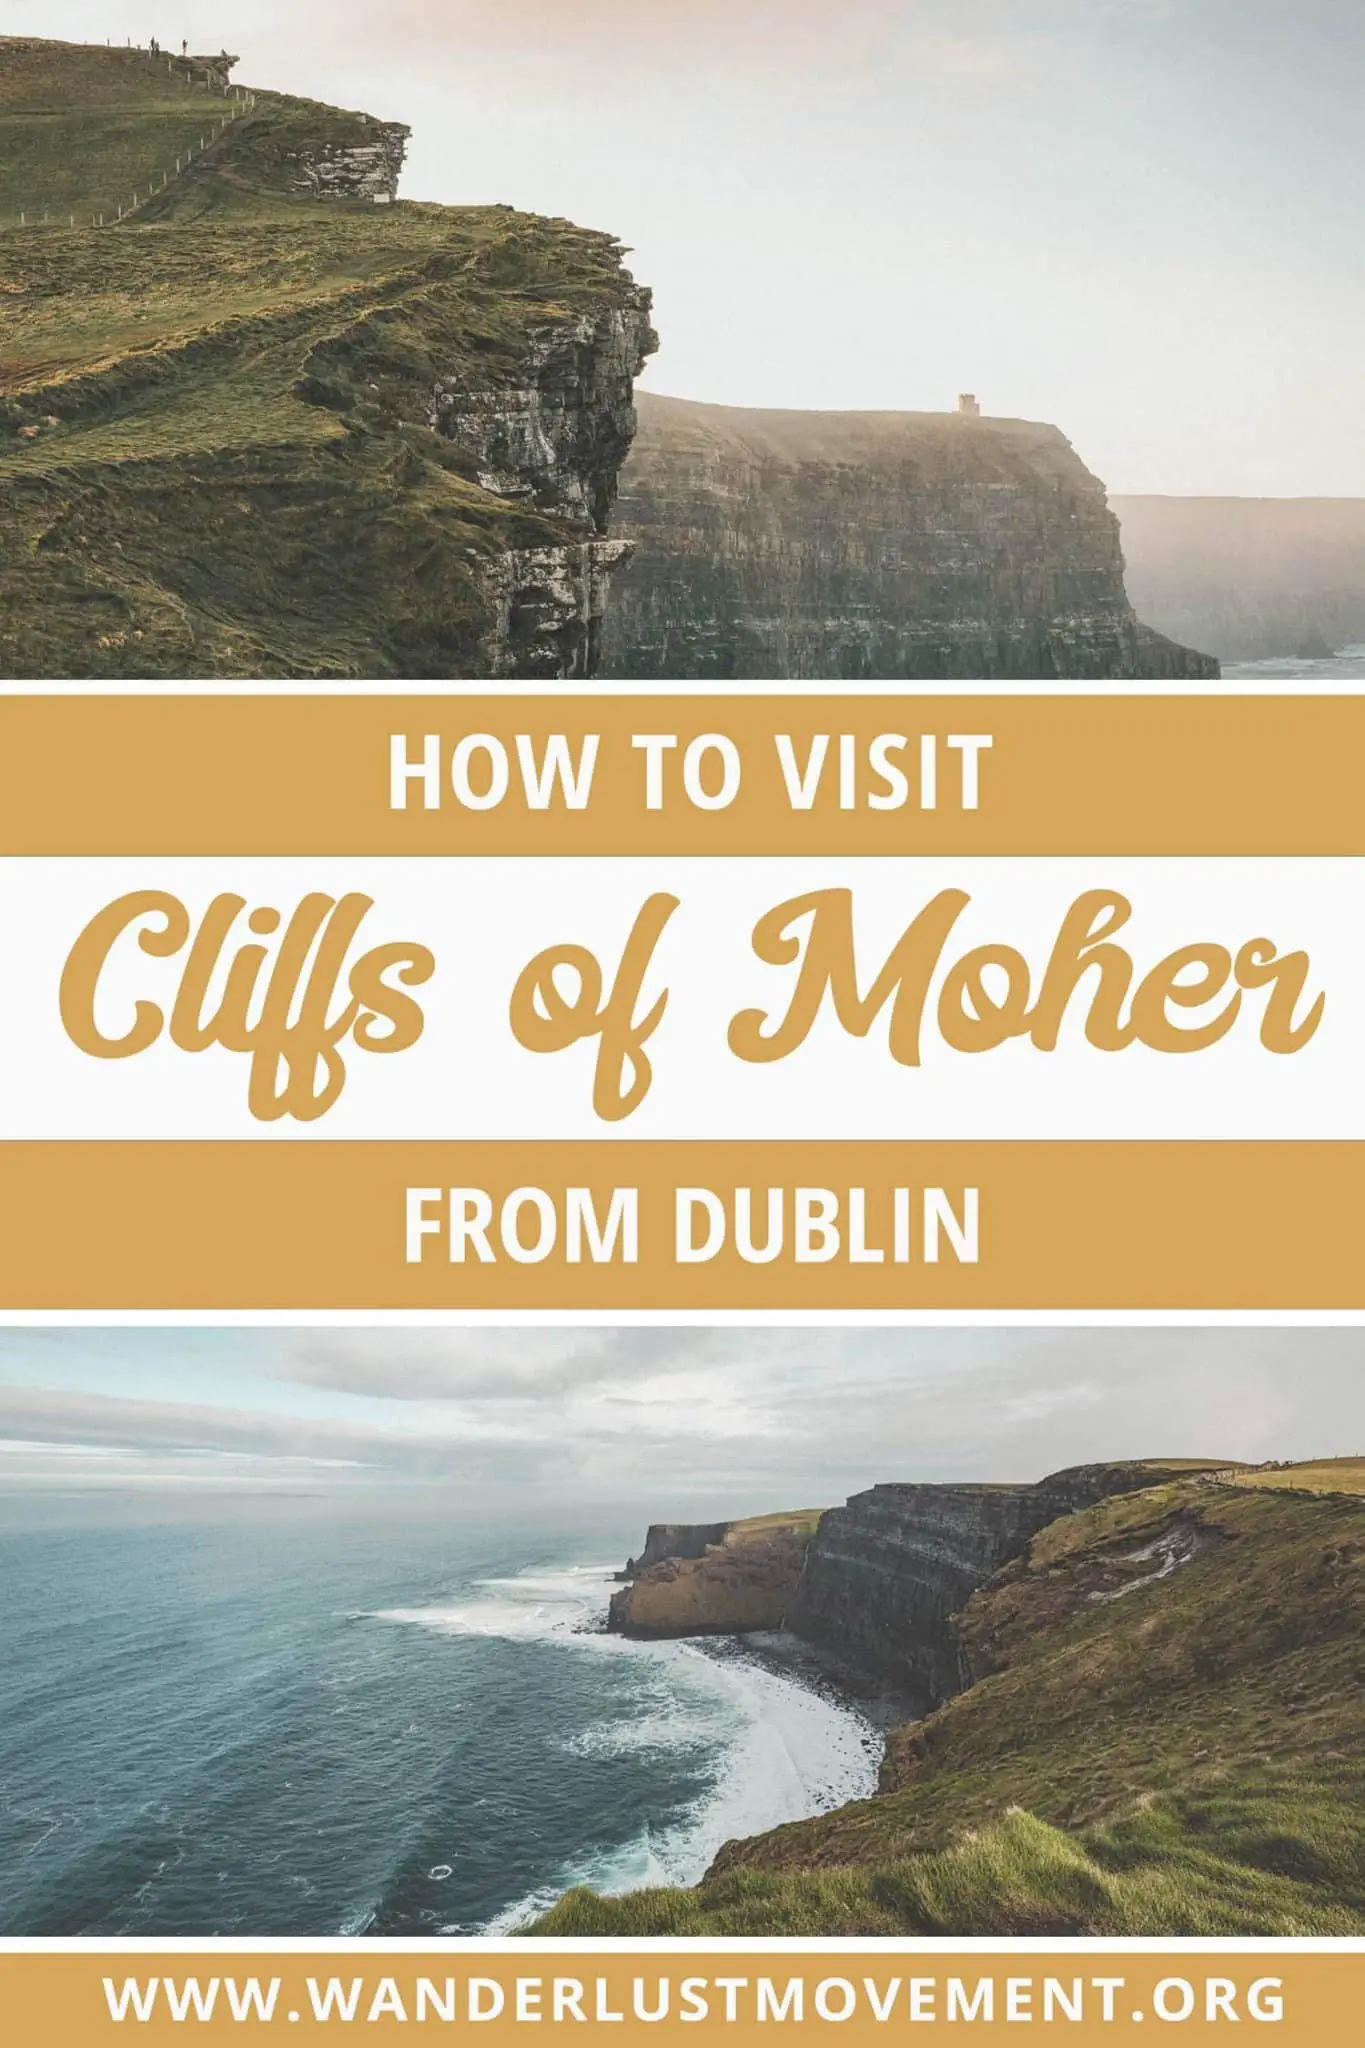 How to Visit The Cliffs of Moher from Dublin